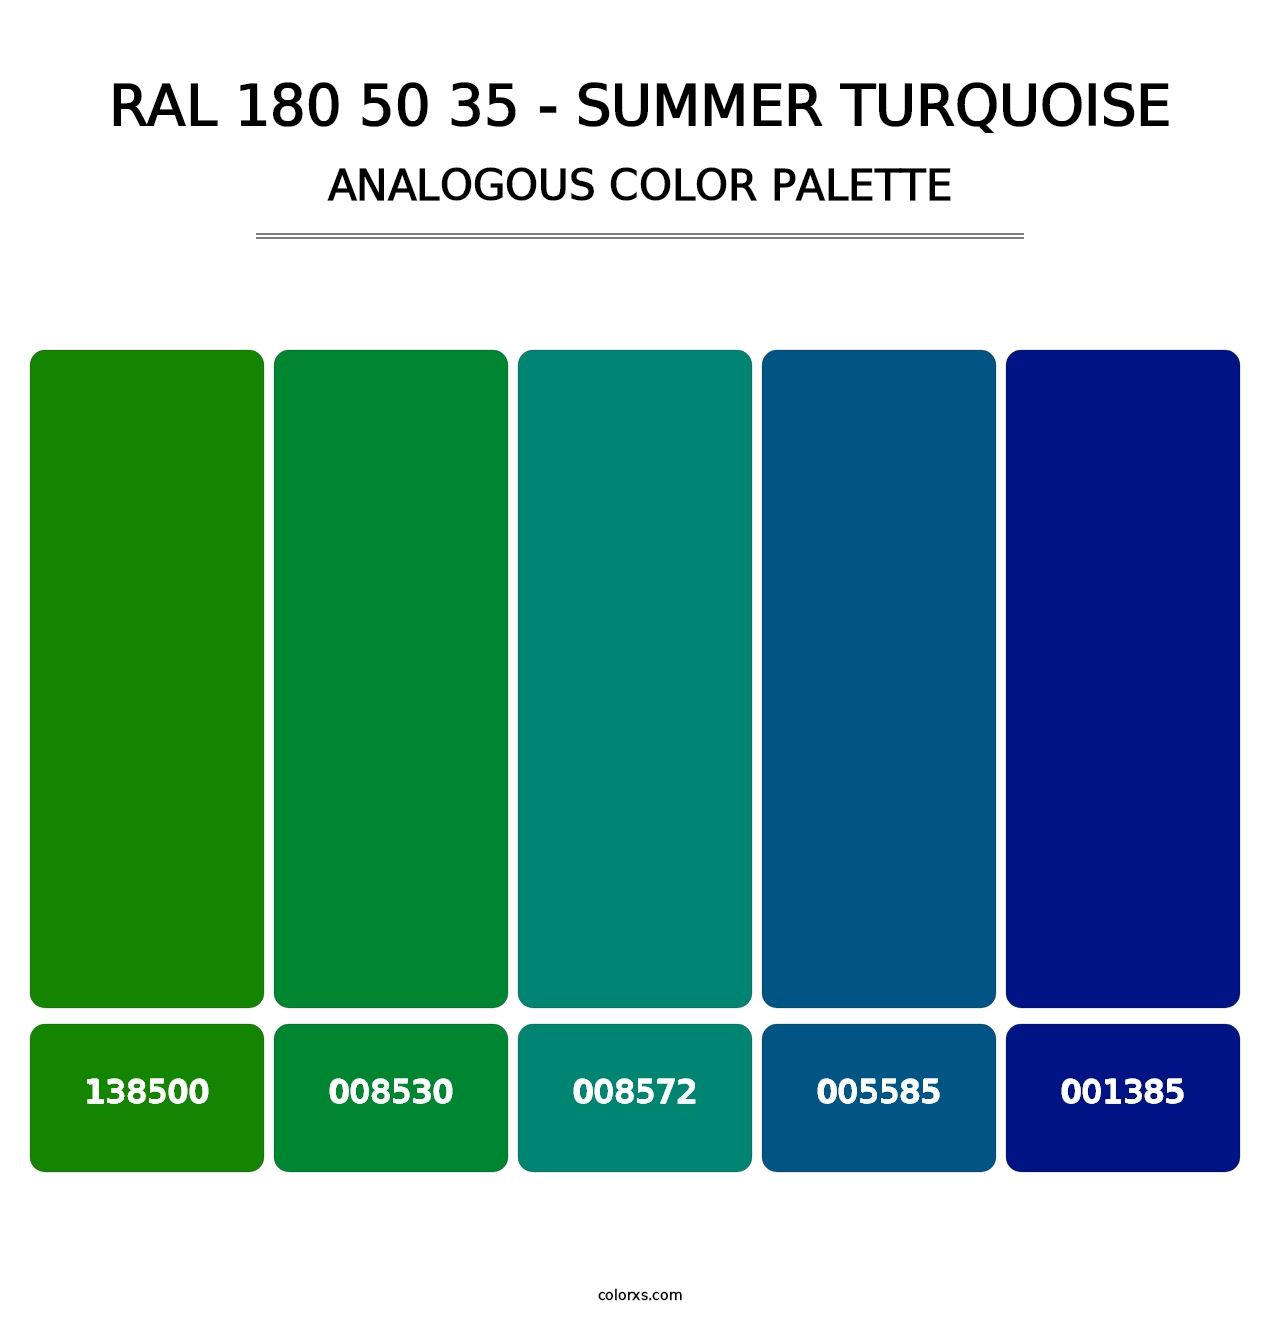 RAL 180 50 35 - Summer Turquoise - Analogous Color Palette